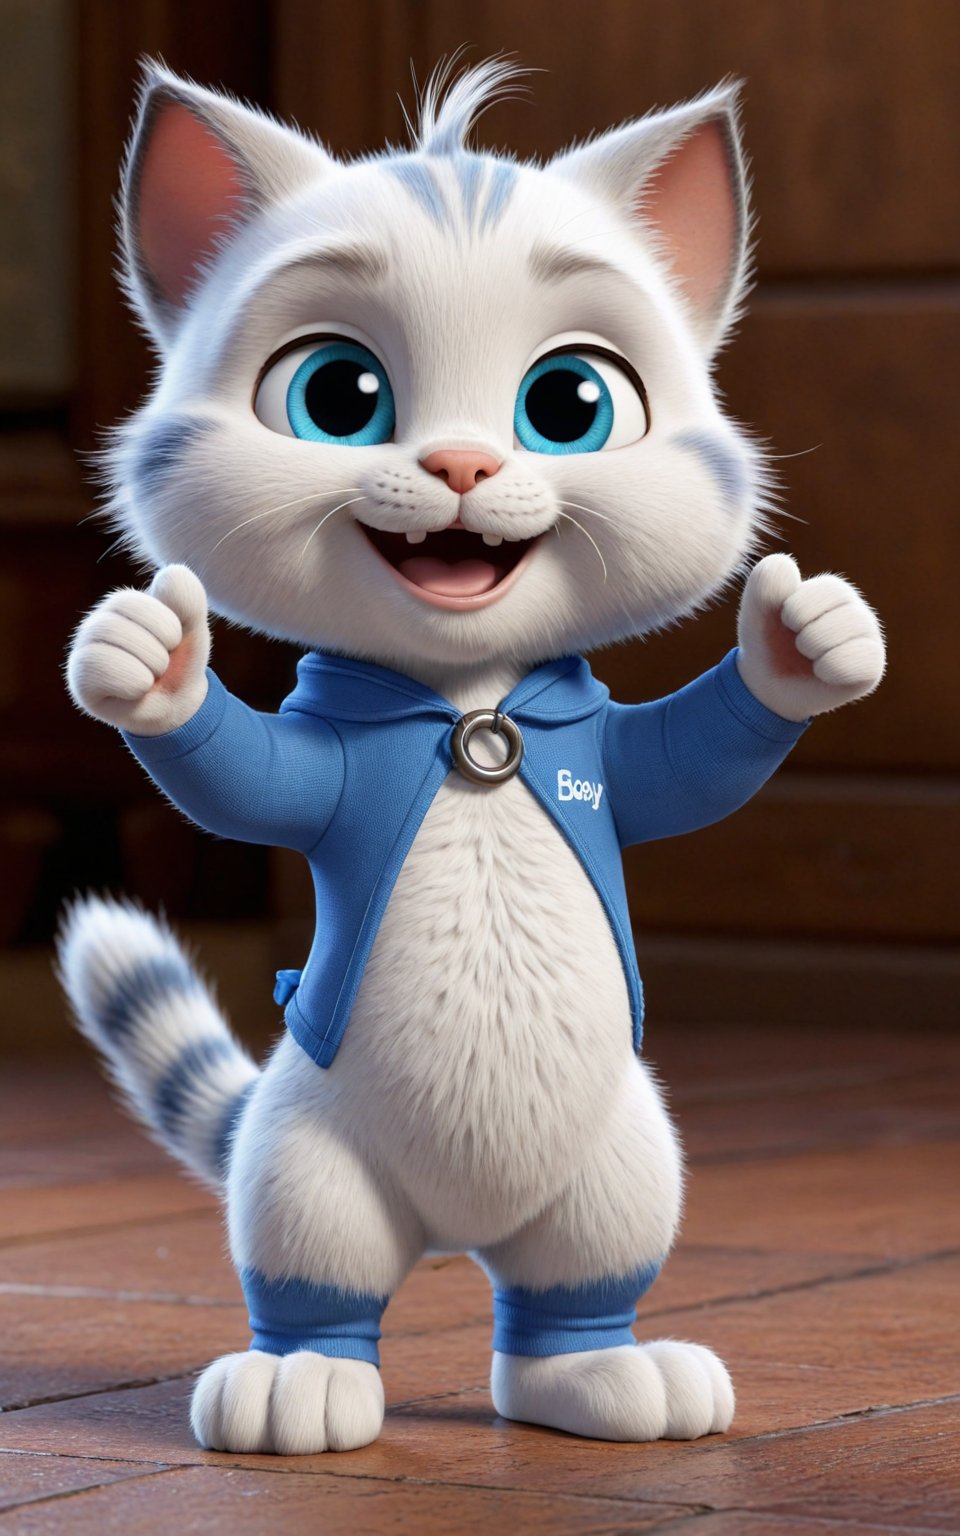 (best quality,8K,highres,masterpiece), ultra-detailed, (Baby cat with blue eyes in True Pixar illustration style), 3D character model of a baby cat with a cartoon face, exuding confidence. The cat has vibrant blue eyes and is dressed in a blue moletom, jeans, white shoes, and a blue ribbon. The whole body image depicts the cat giving a thumbs up, looking directly at the center of the image with a warm smile and a welcoming posture. The scene is rendered in the characteristic style of Pixar, capturing the playful and charming essence of the character